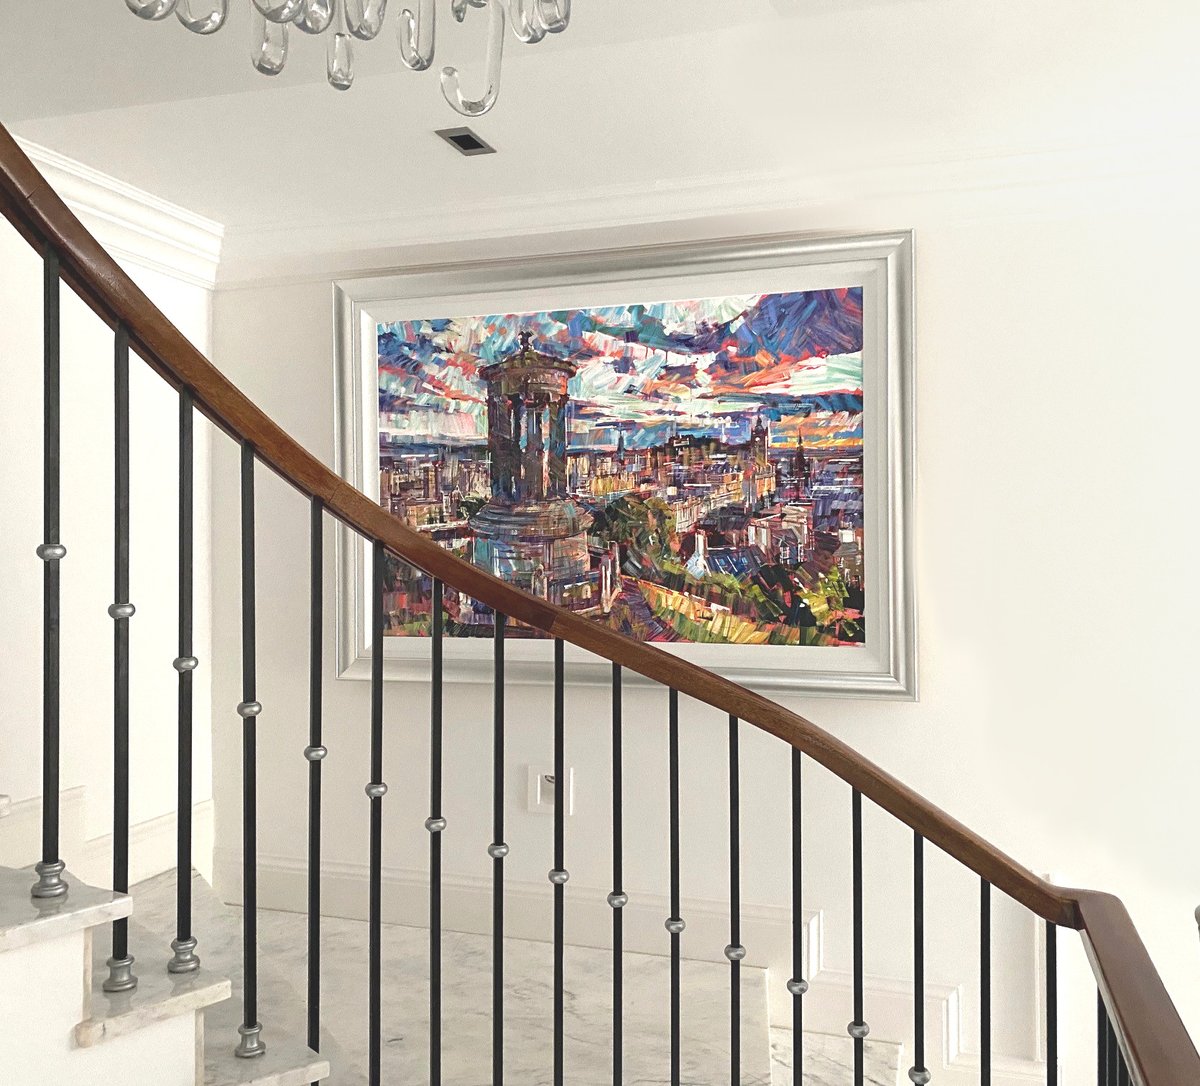 This headlining artwork by Colin Brown took centre stage at our live event in May... and just a short while later, it was being installed in this perfect spot at the home of a Watson client!
#watsonartgallery #caltonhill  #edinburgh #scotland  #contemporaryimpressionism